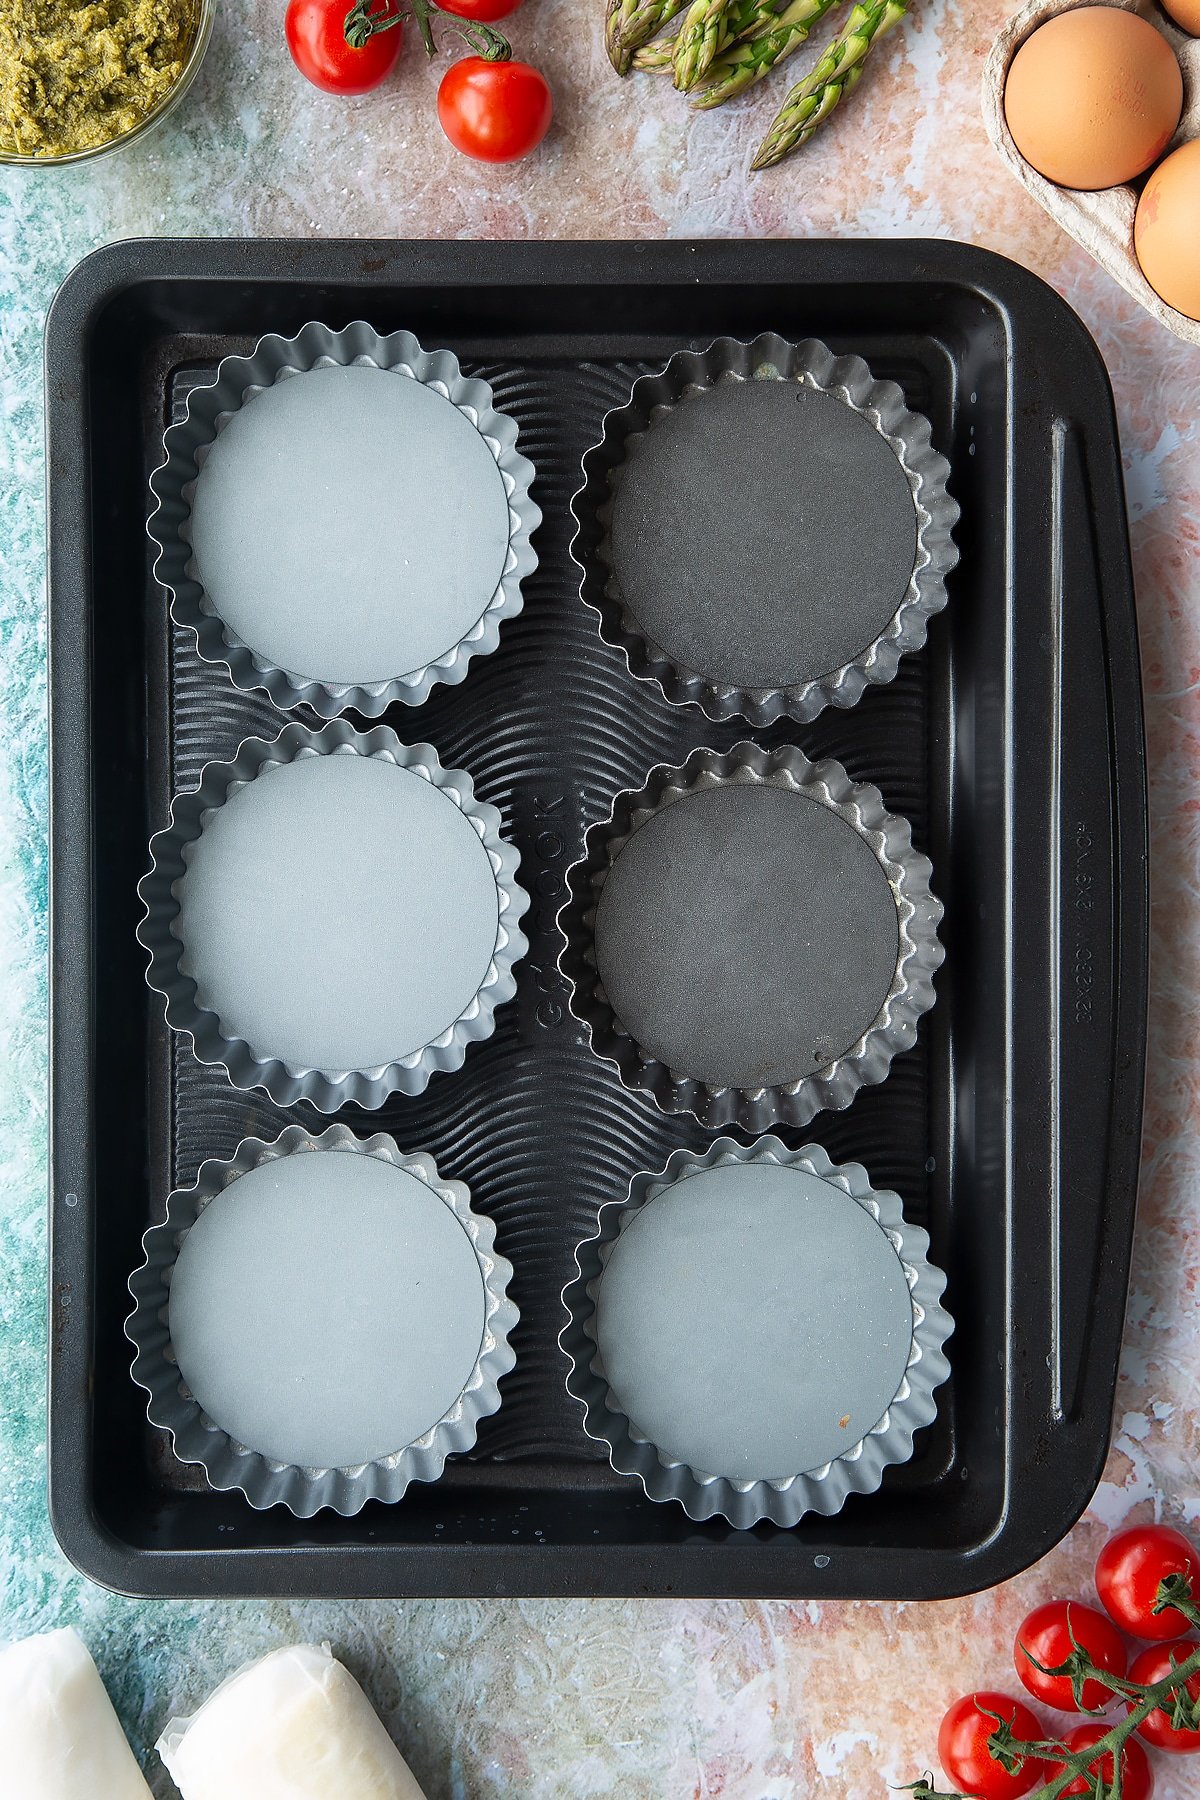 Six tartlet tins on a baking tray. Ingredients to make asparagus tartlets surround the tray.